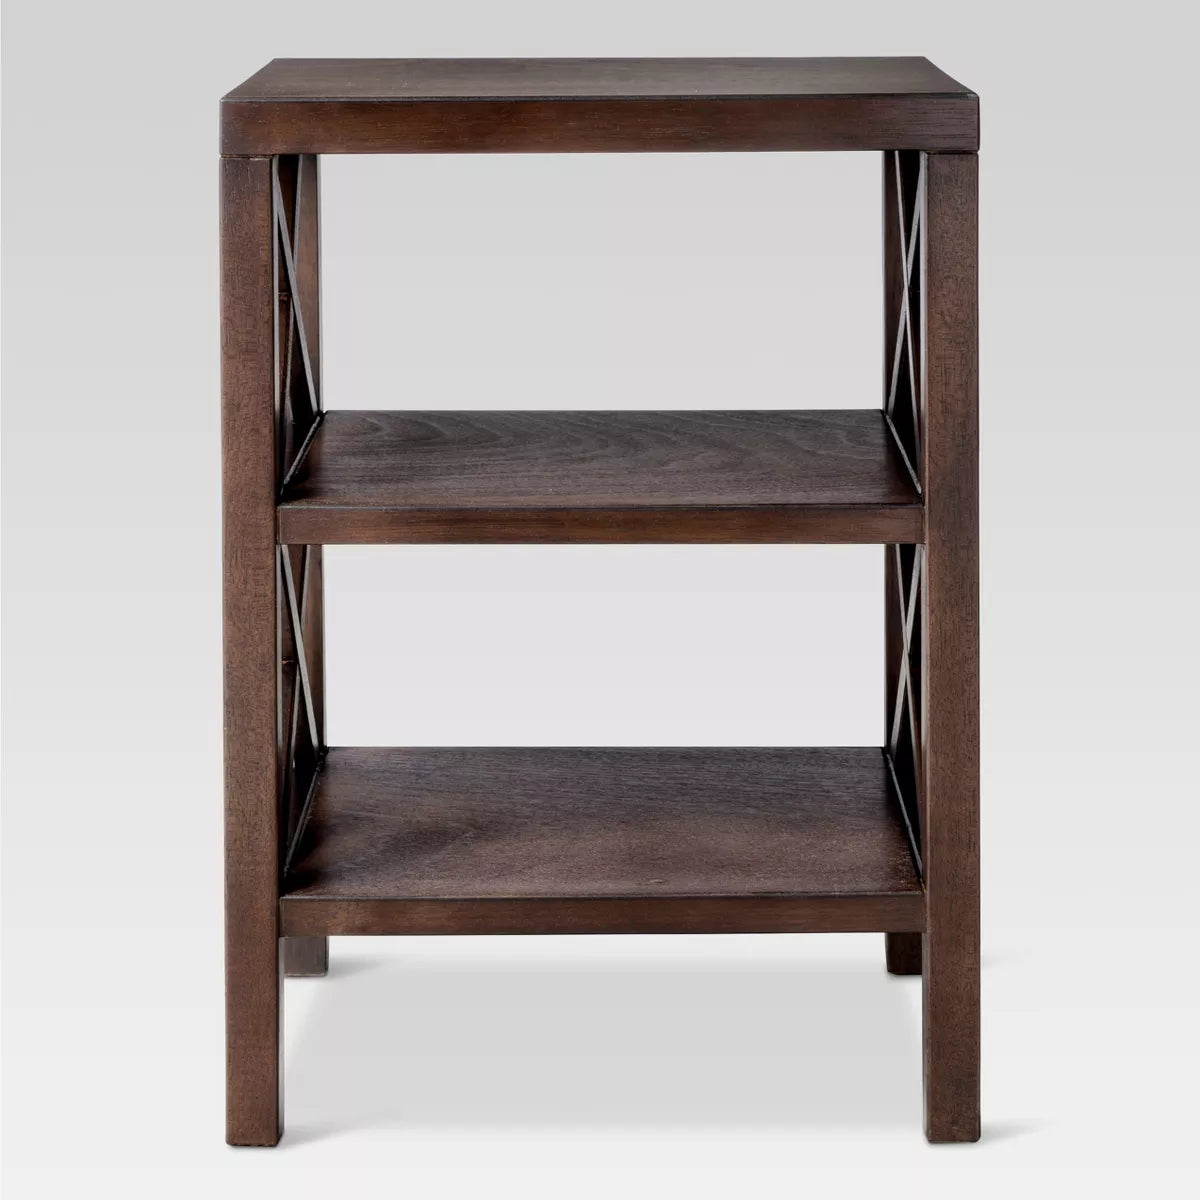 Owings End Table with 2 Shelves (Not Assembled) Espresso - Threshold